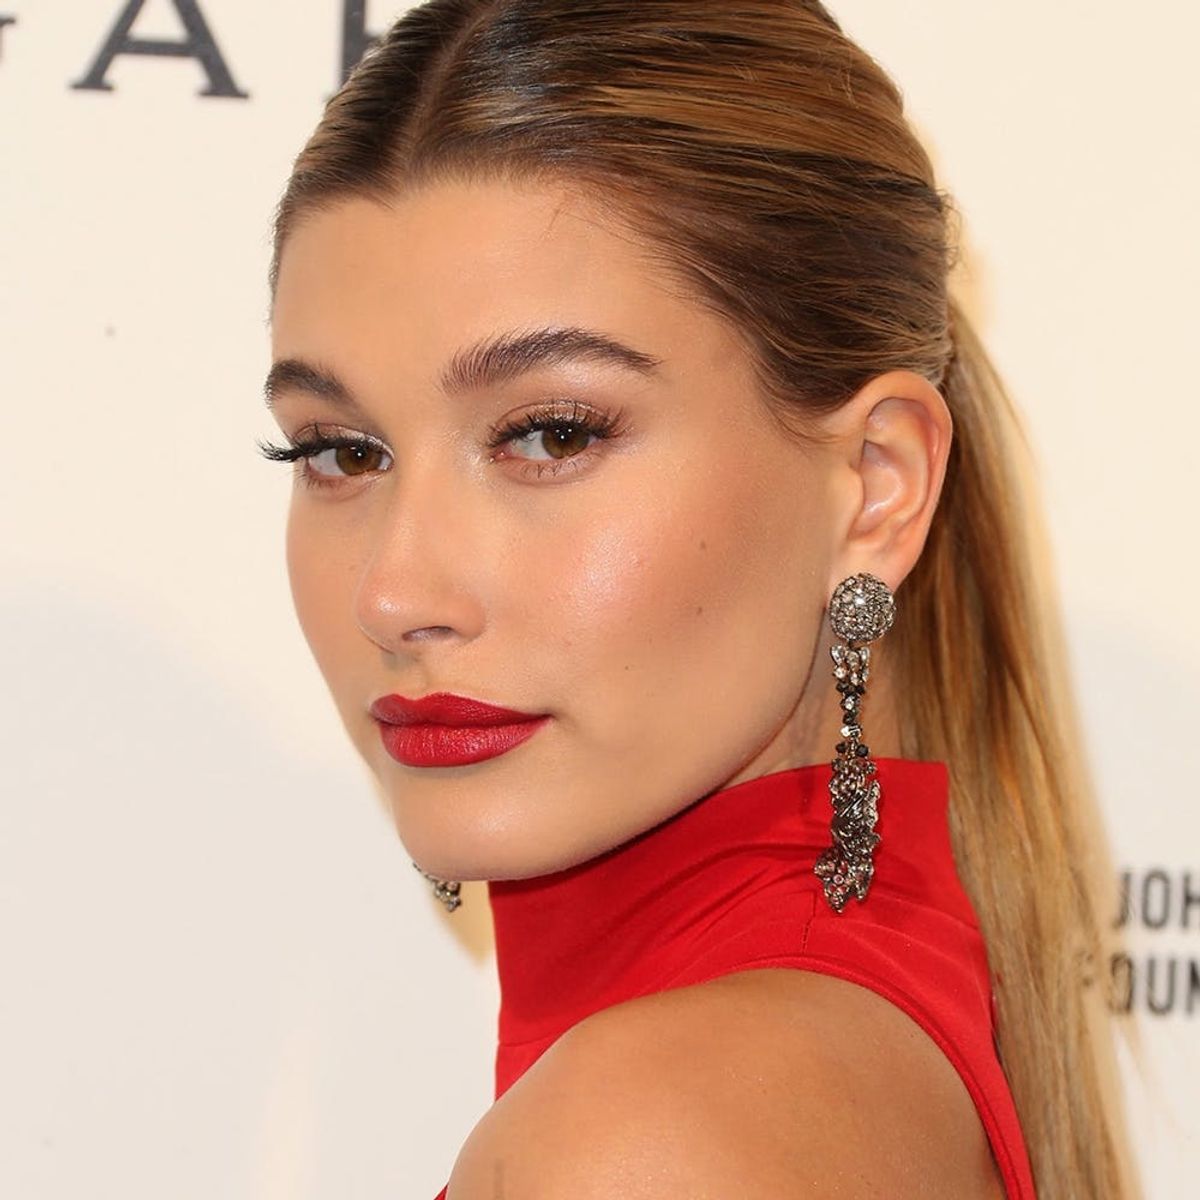 Hailey Baldwin’s New BFF Tattoo Is NOT With Kendall Jenner